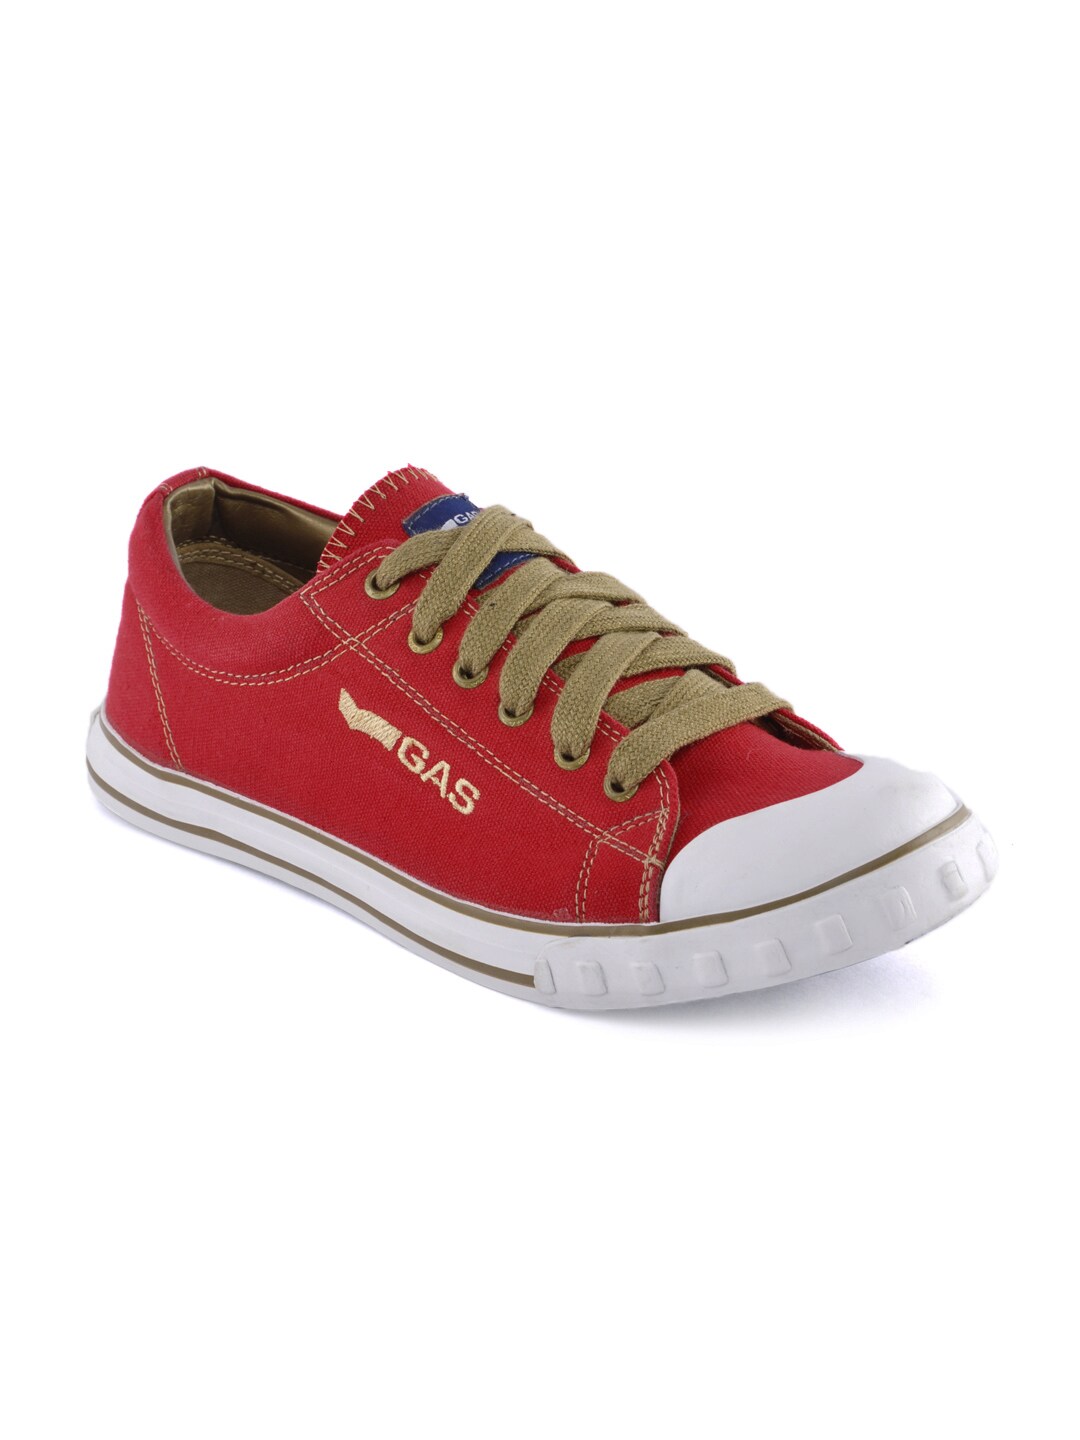 Gas Men Freetime Red Casual Shoes